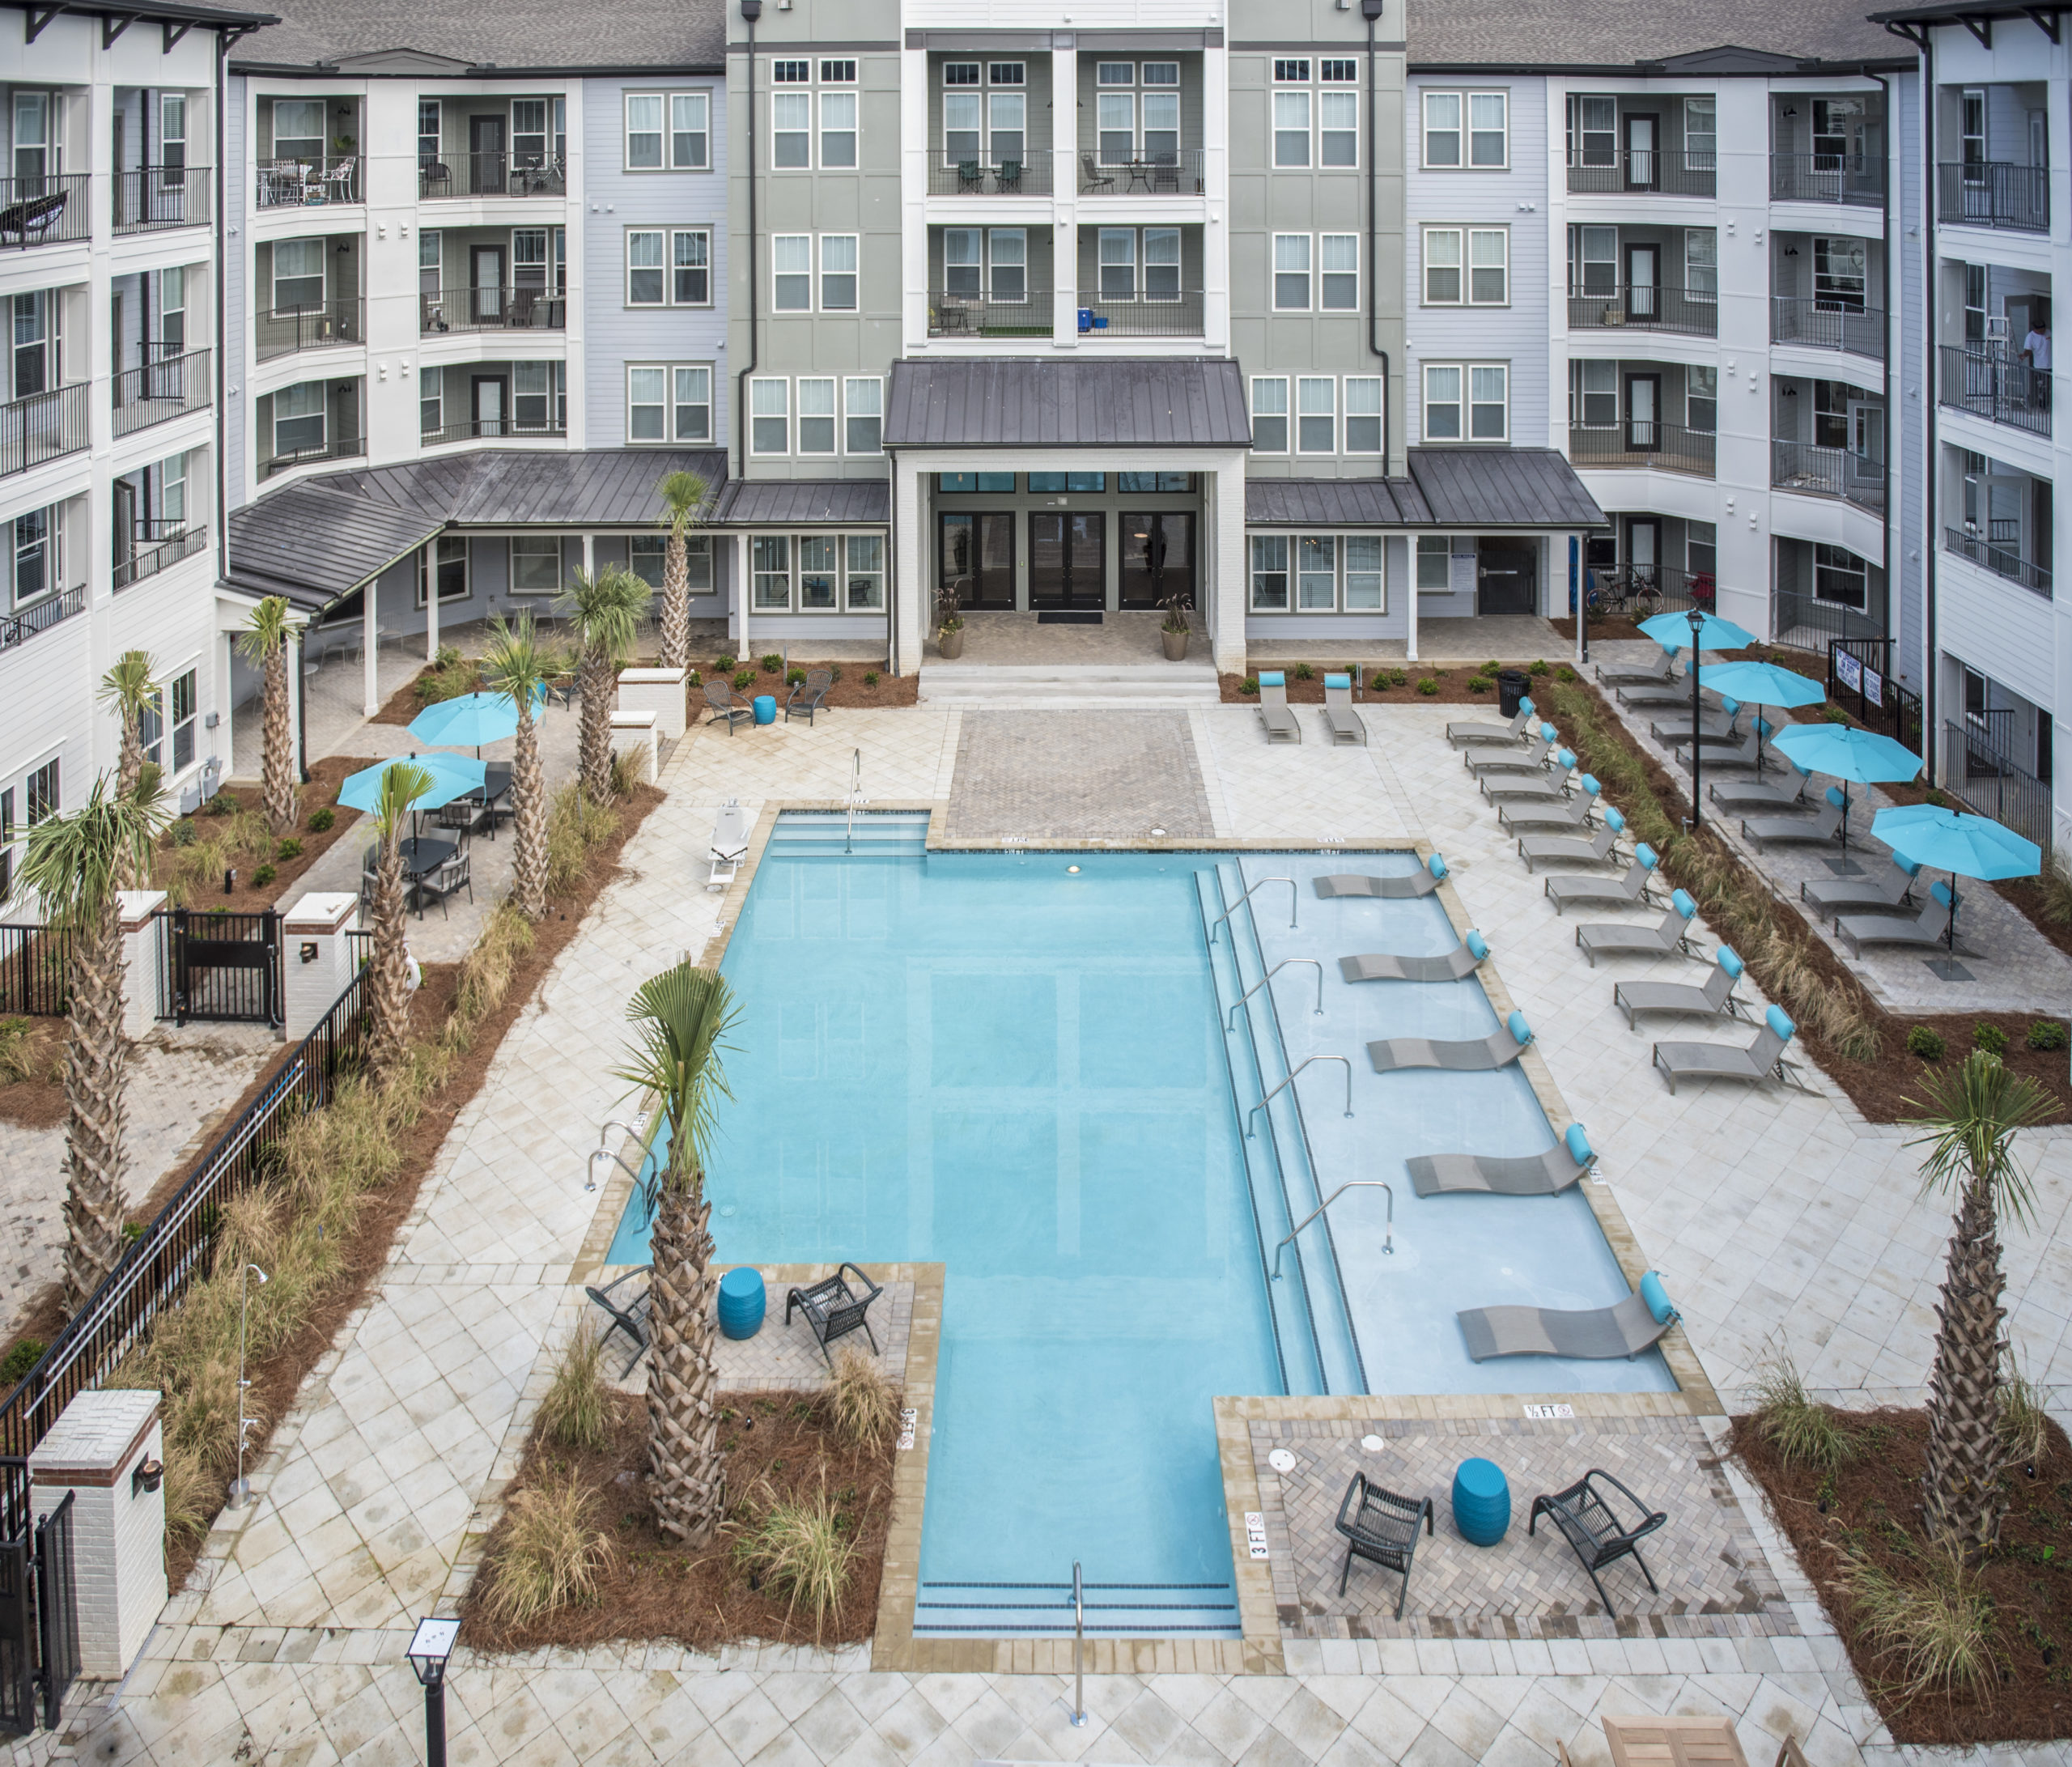 Ironwood – North Augusta, SC - Pool and Buildings Birdseye View